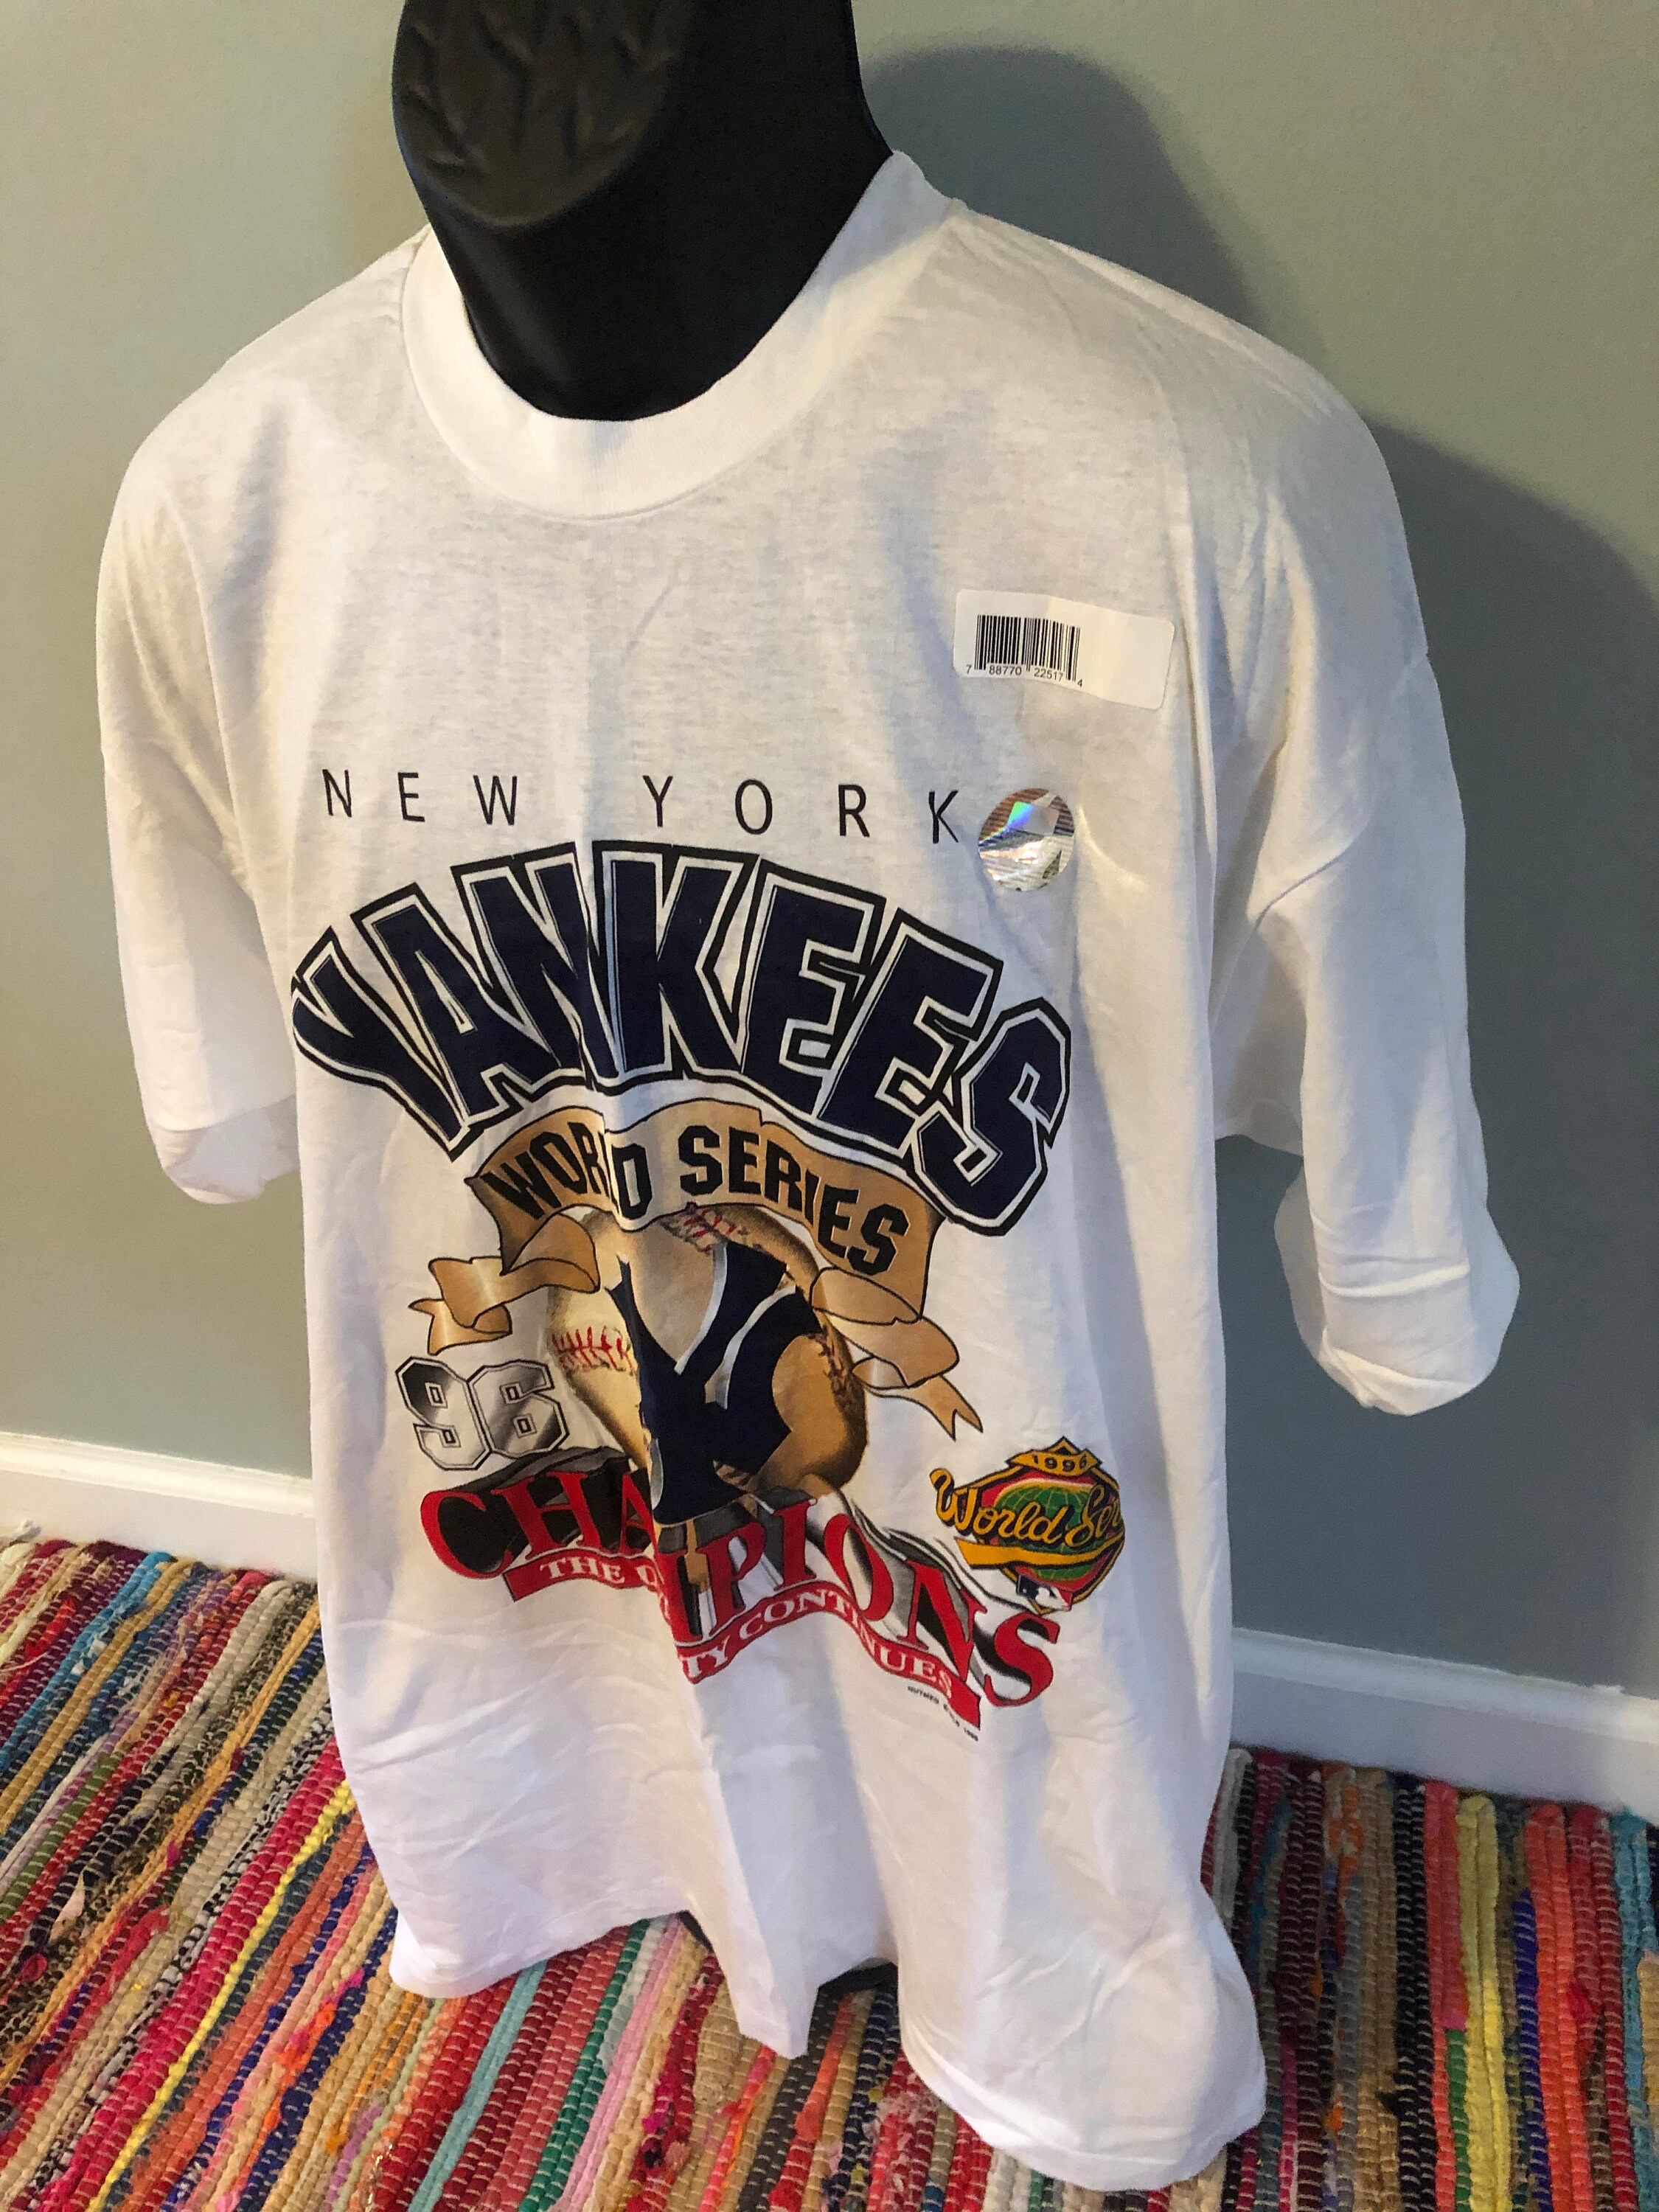 Buy 1996 New York Yankees World Series Champions Shirt Vintage 90s Online in India image photo